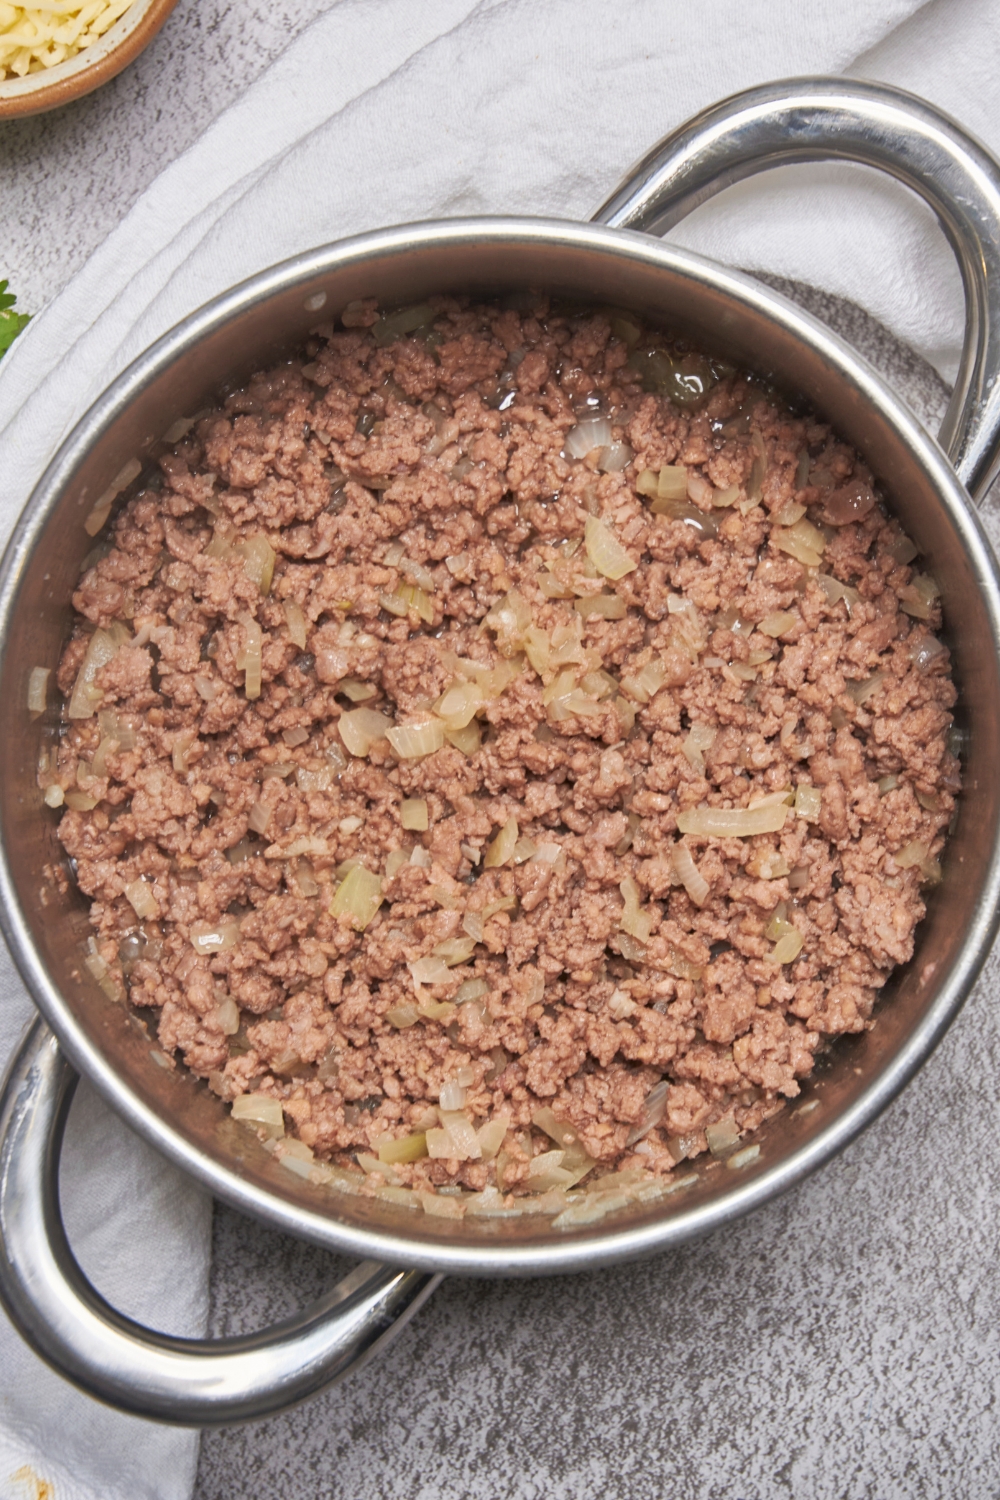 A deep pot of onions and ground beef cooking.